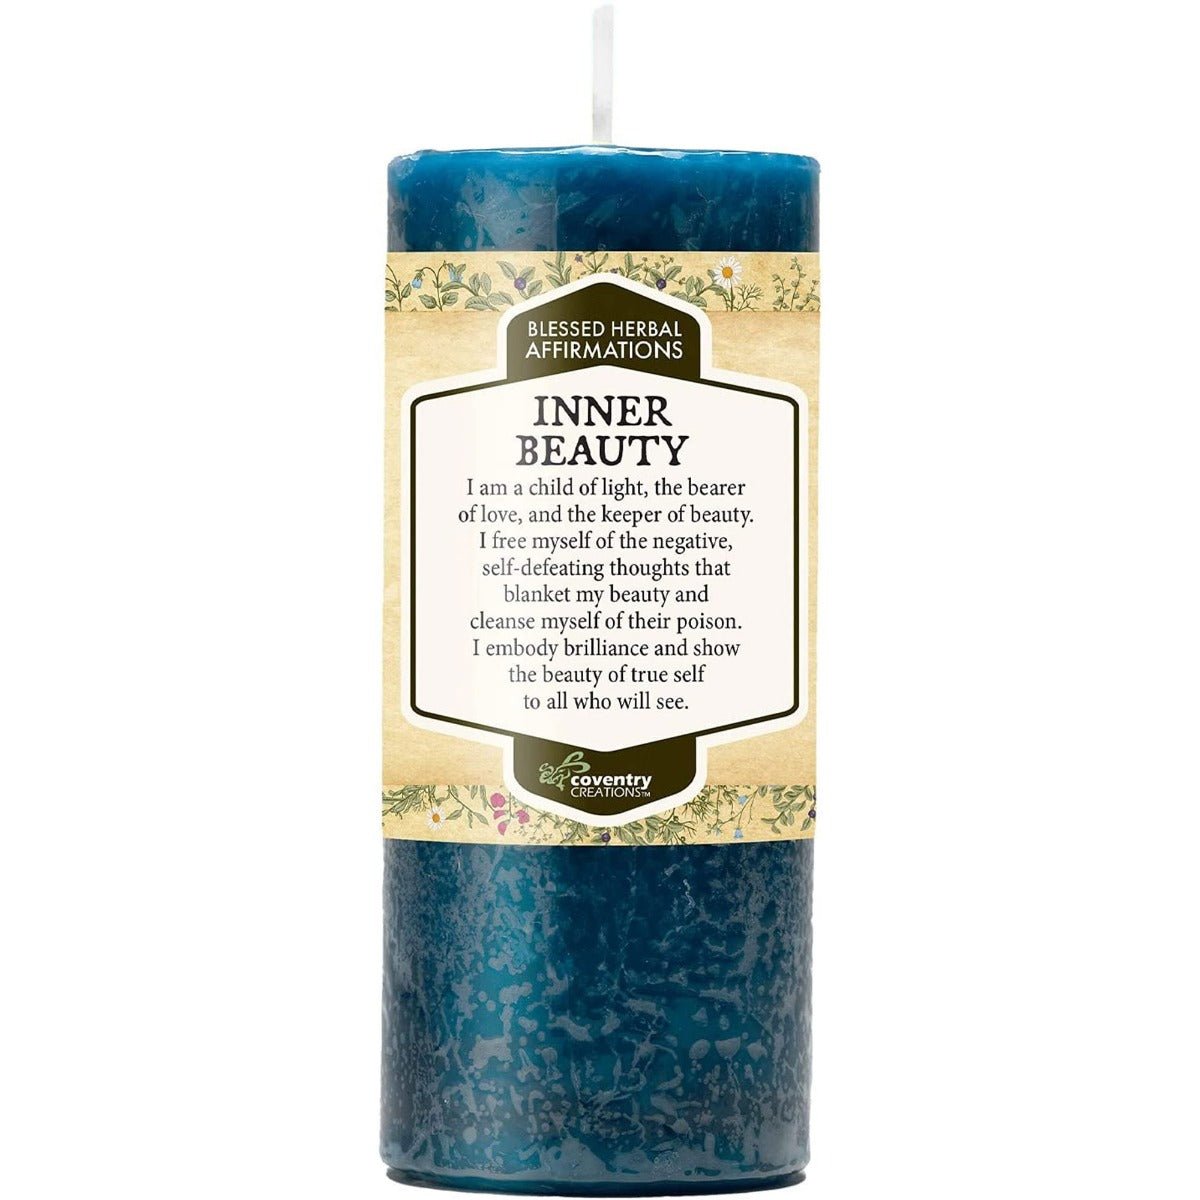 Inner Beauty Affirmation Candle - 13 Moons